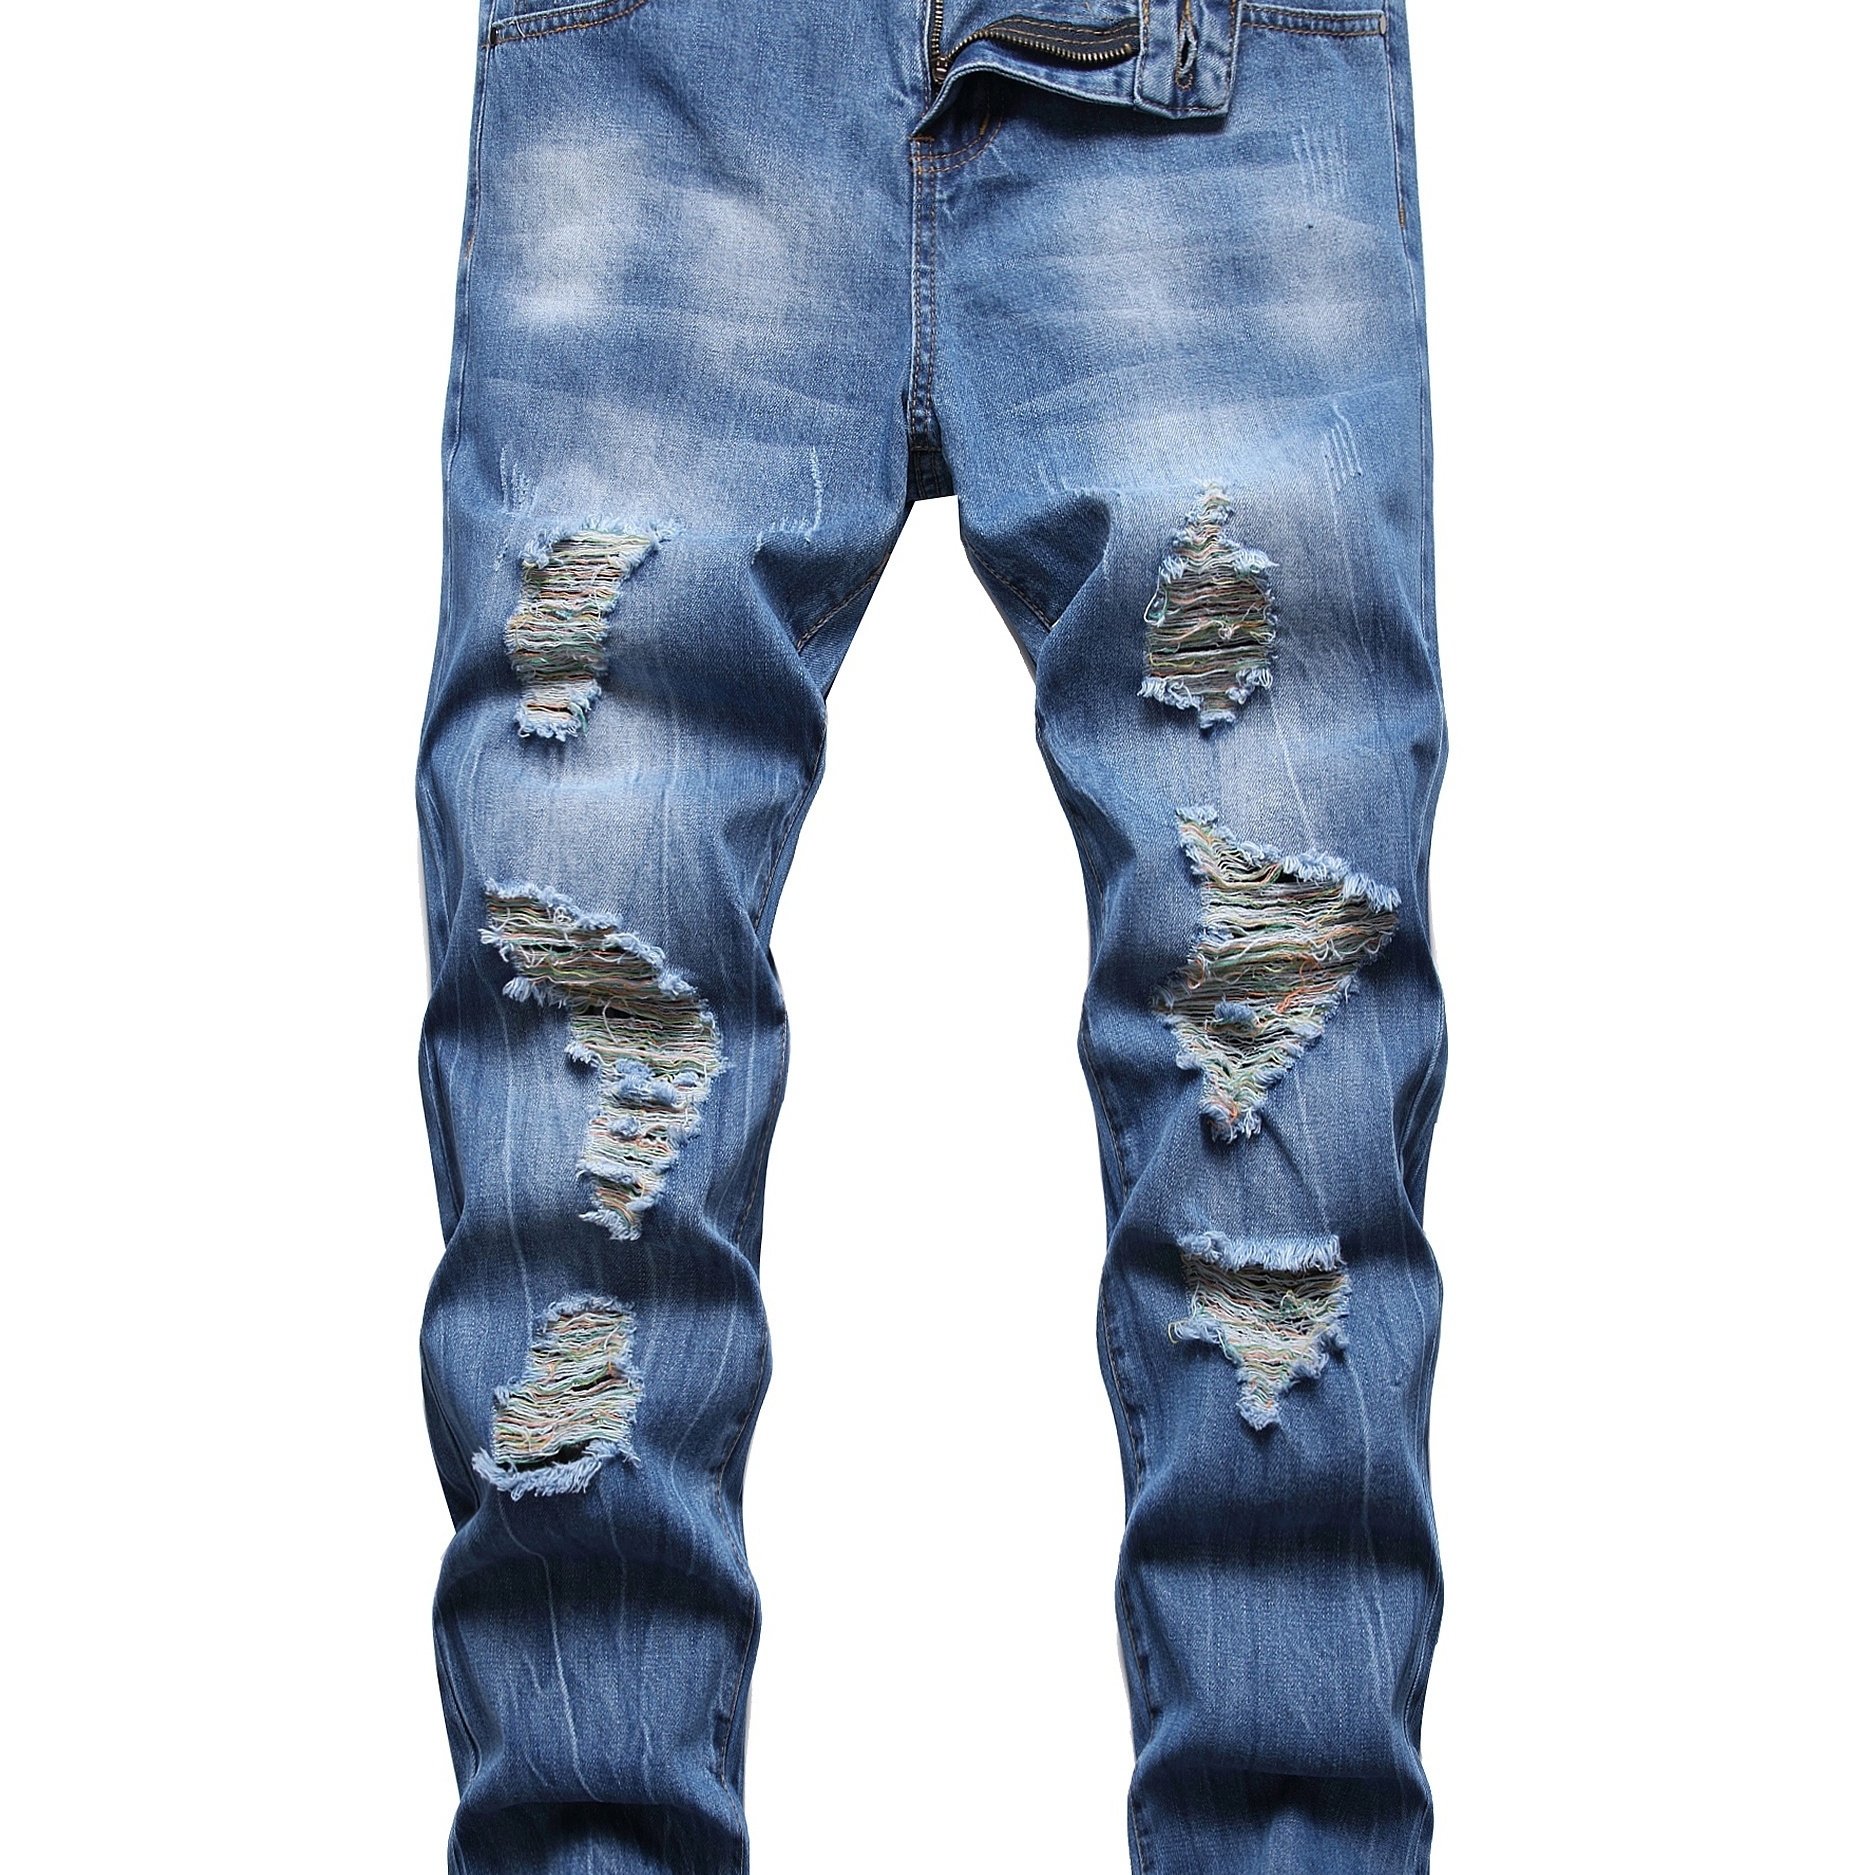 Men's Cotton Jeans Casual Slim Fit Straight Blue Ripped Jeans ...